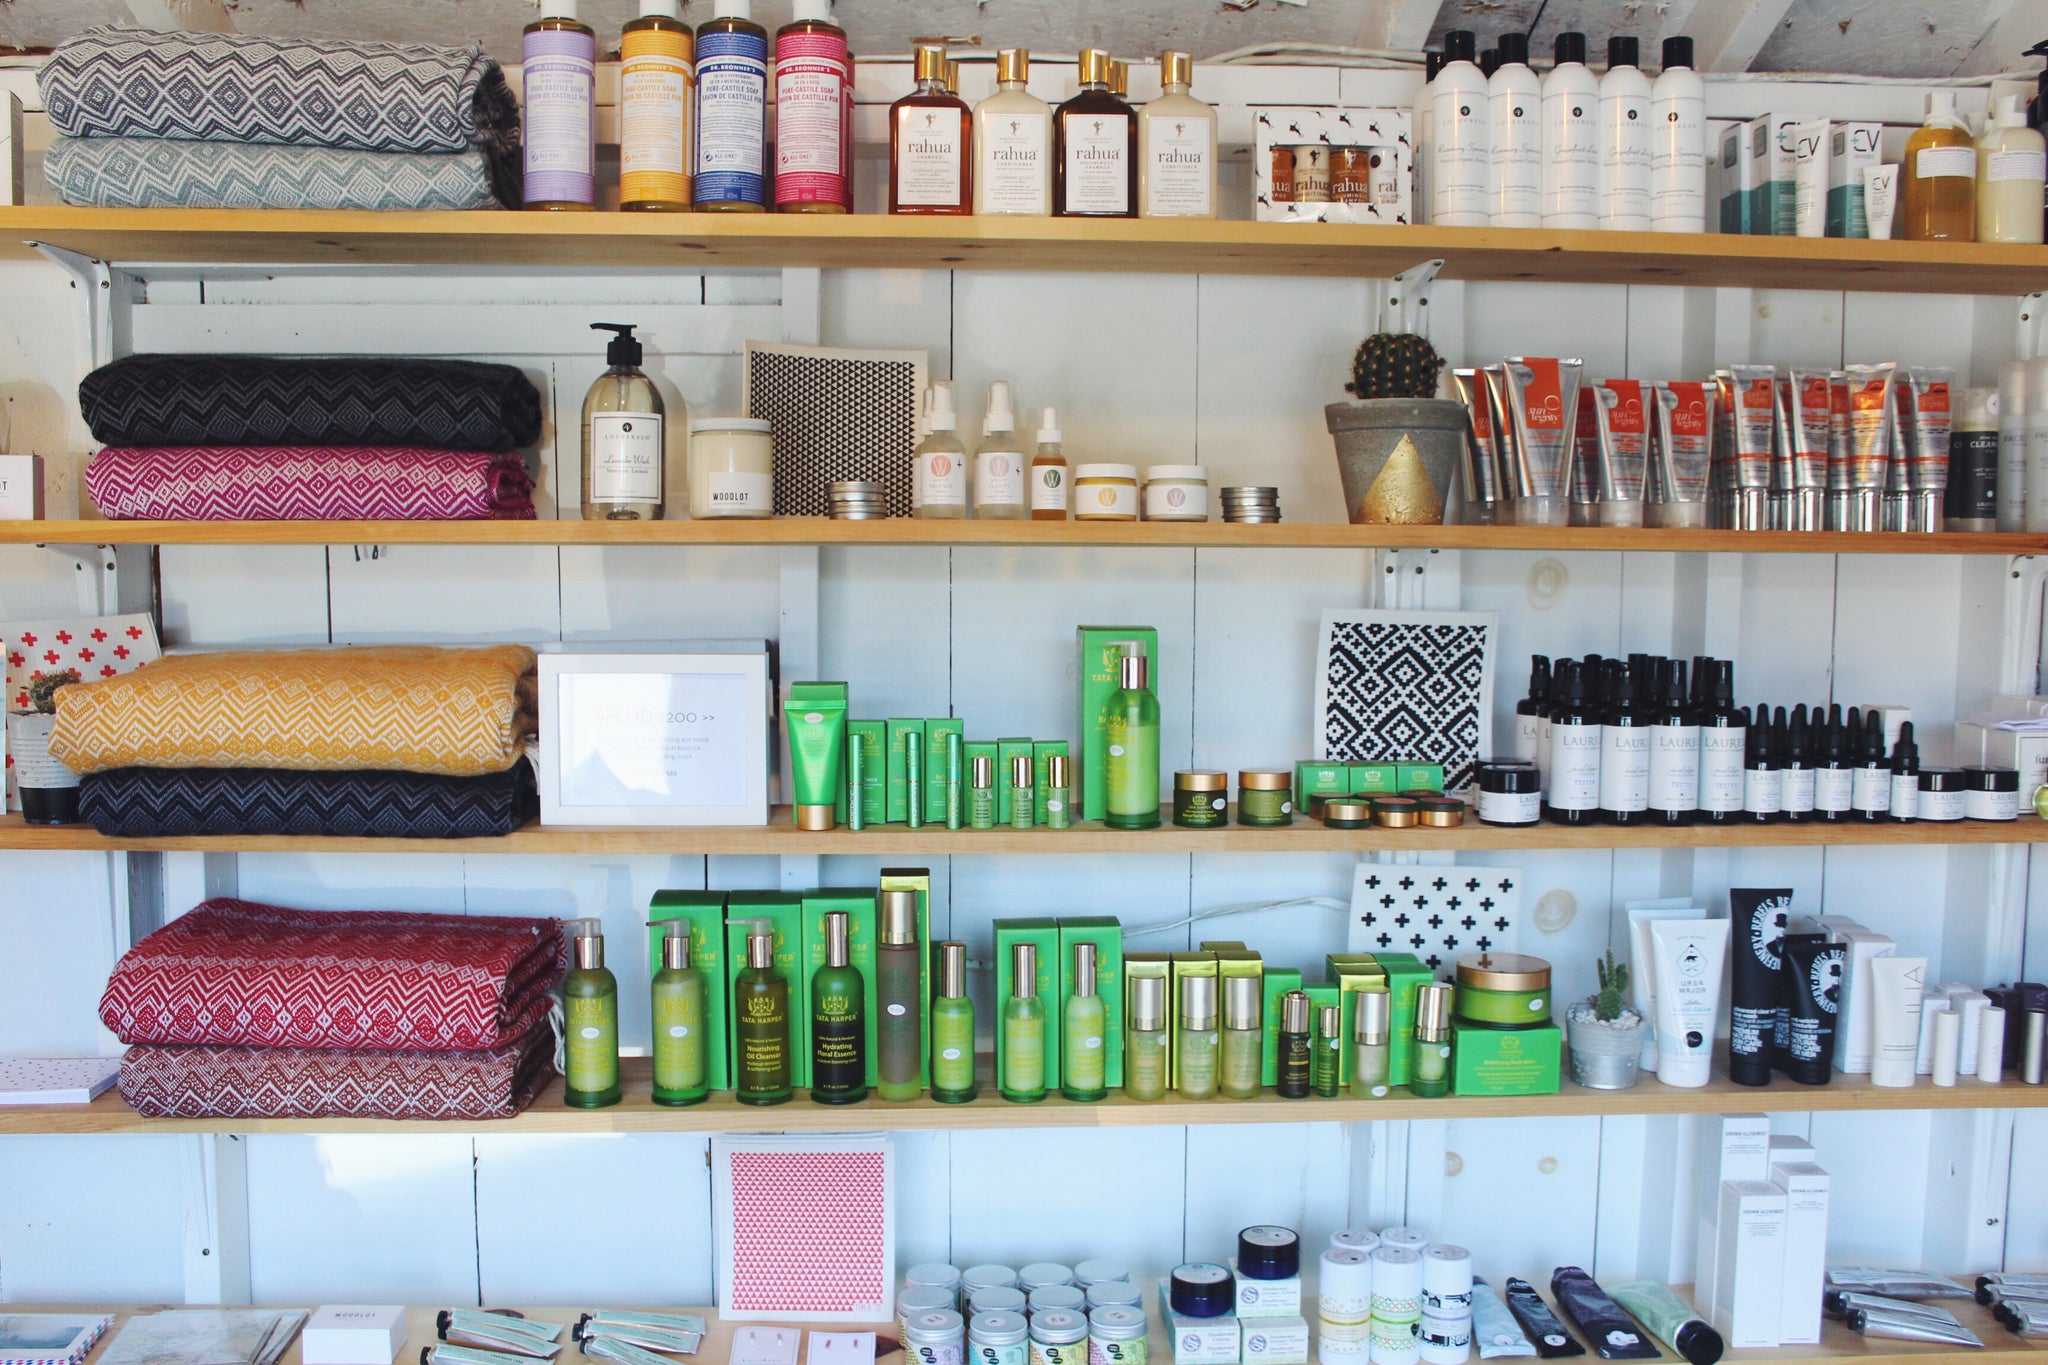 Holistic and natural health and beauty items line every wall. 